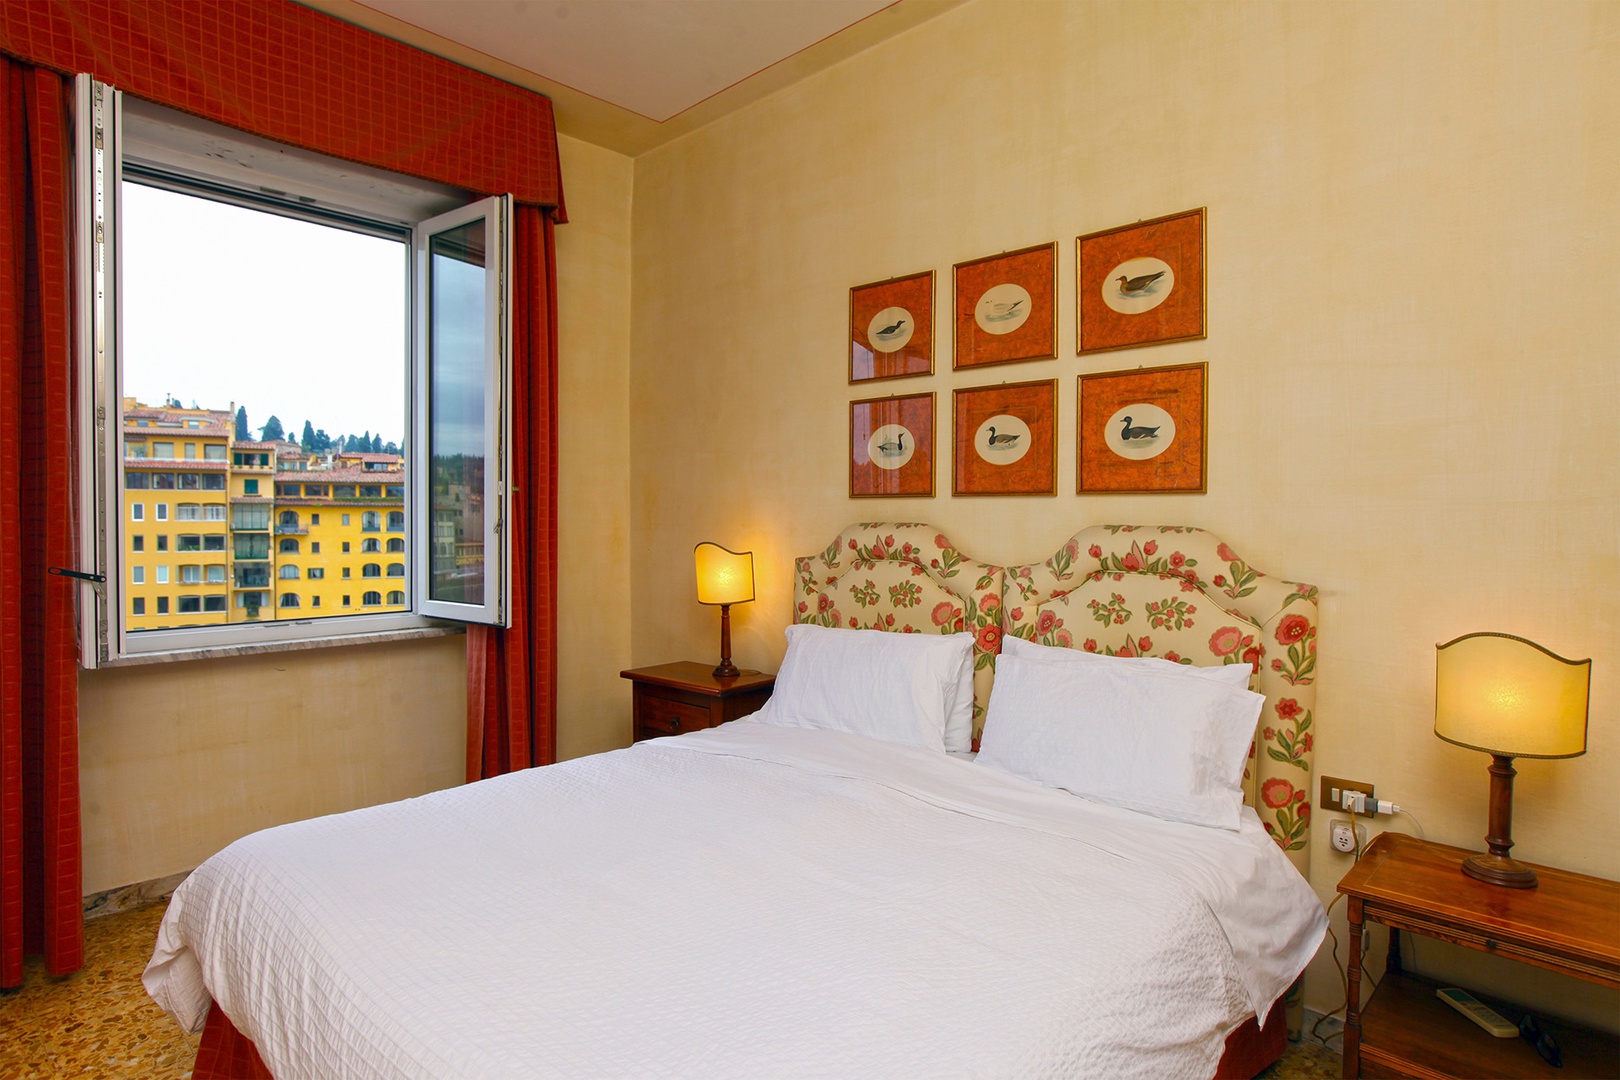 Bedroom 1 has Arno river views. Beds can be prepared together or as two beds.